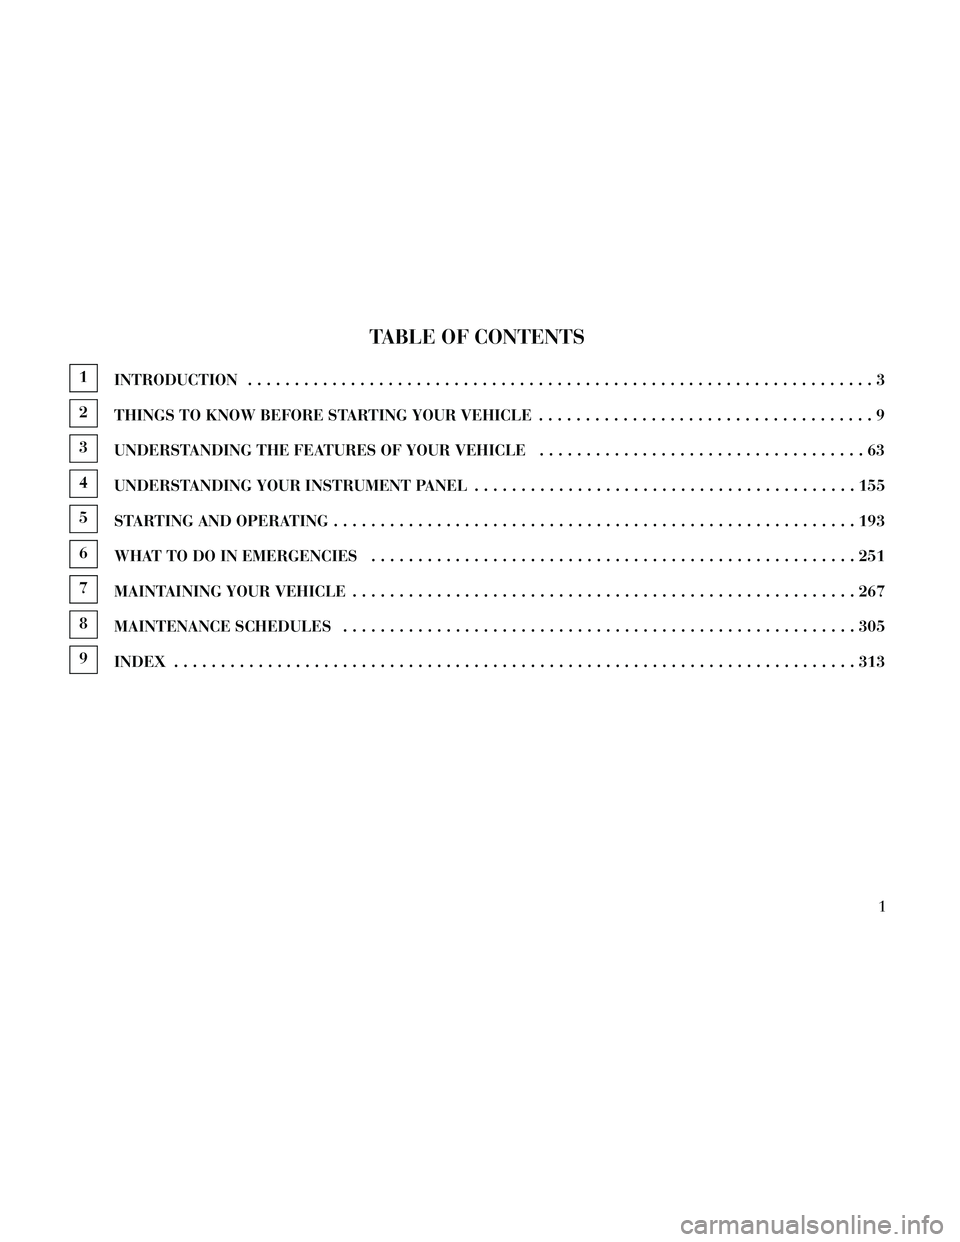 Lancia Thema 2014  Owner handbook (in English) TABLE OF CONTENTS
1INTRODUCTION ...................................................................3
2
THINGS TO KNOW BEFORE STARTING YOUR VEHICLE ....................................9
3
UNDERSTANDING